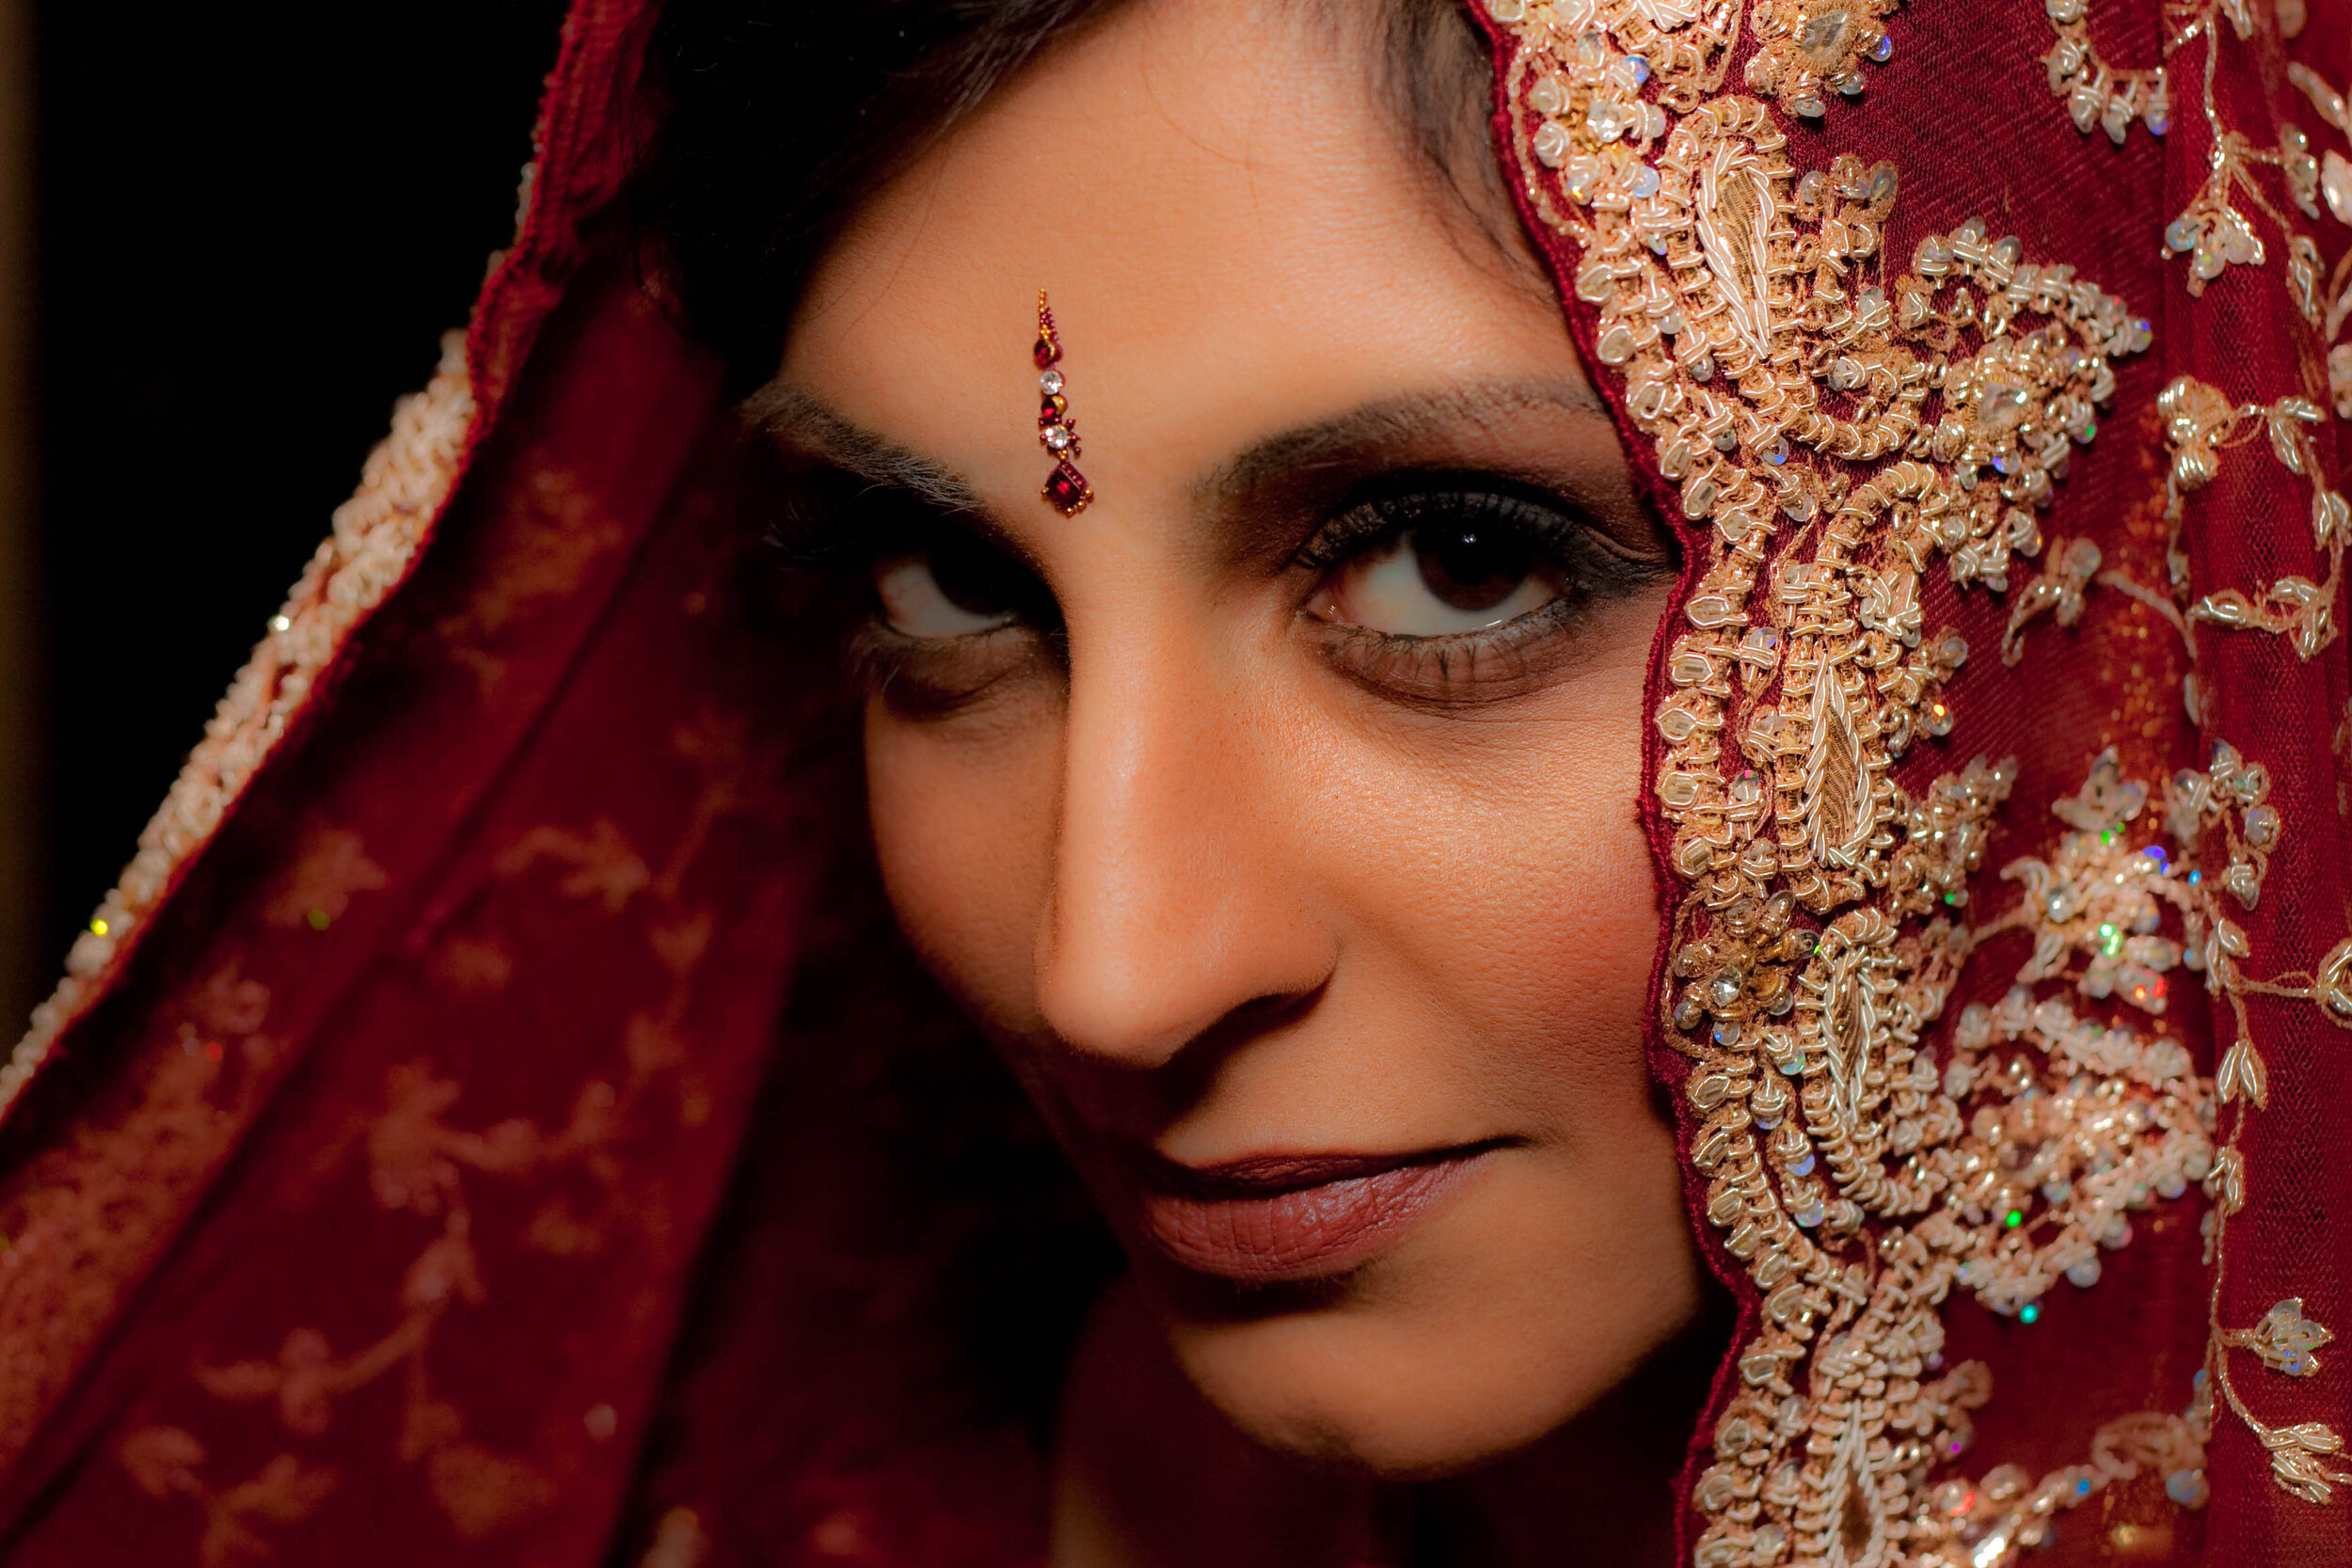  high fashion editorial image of south asian bride dressed in a red saree 